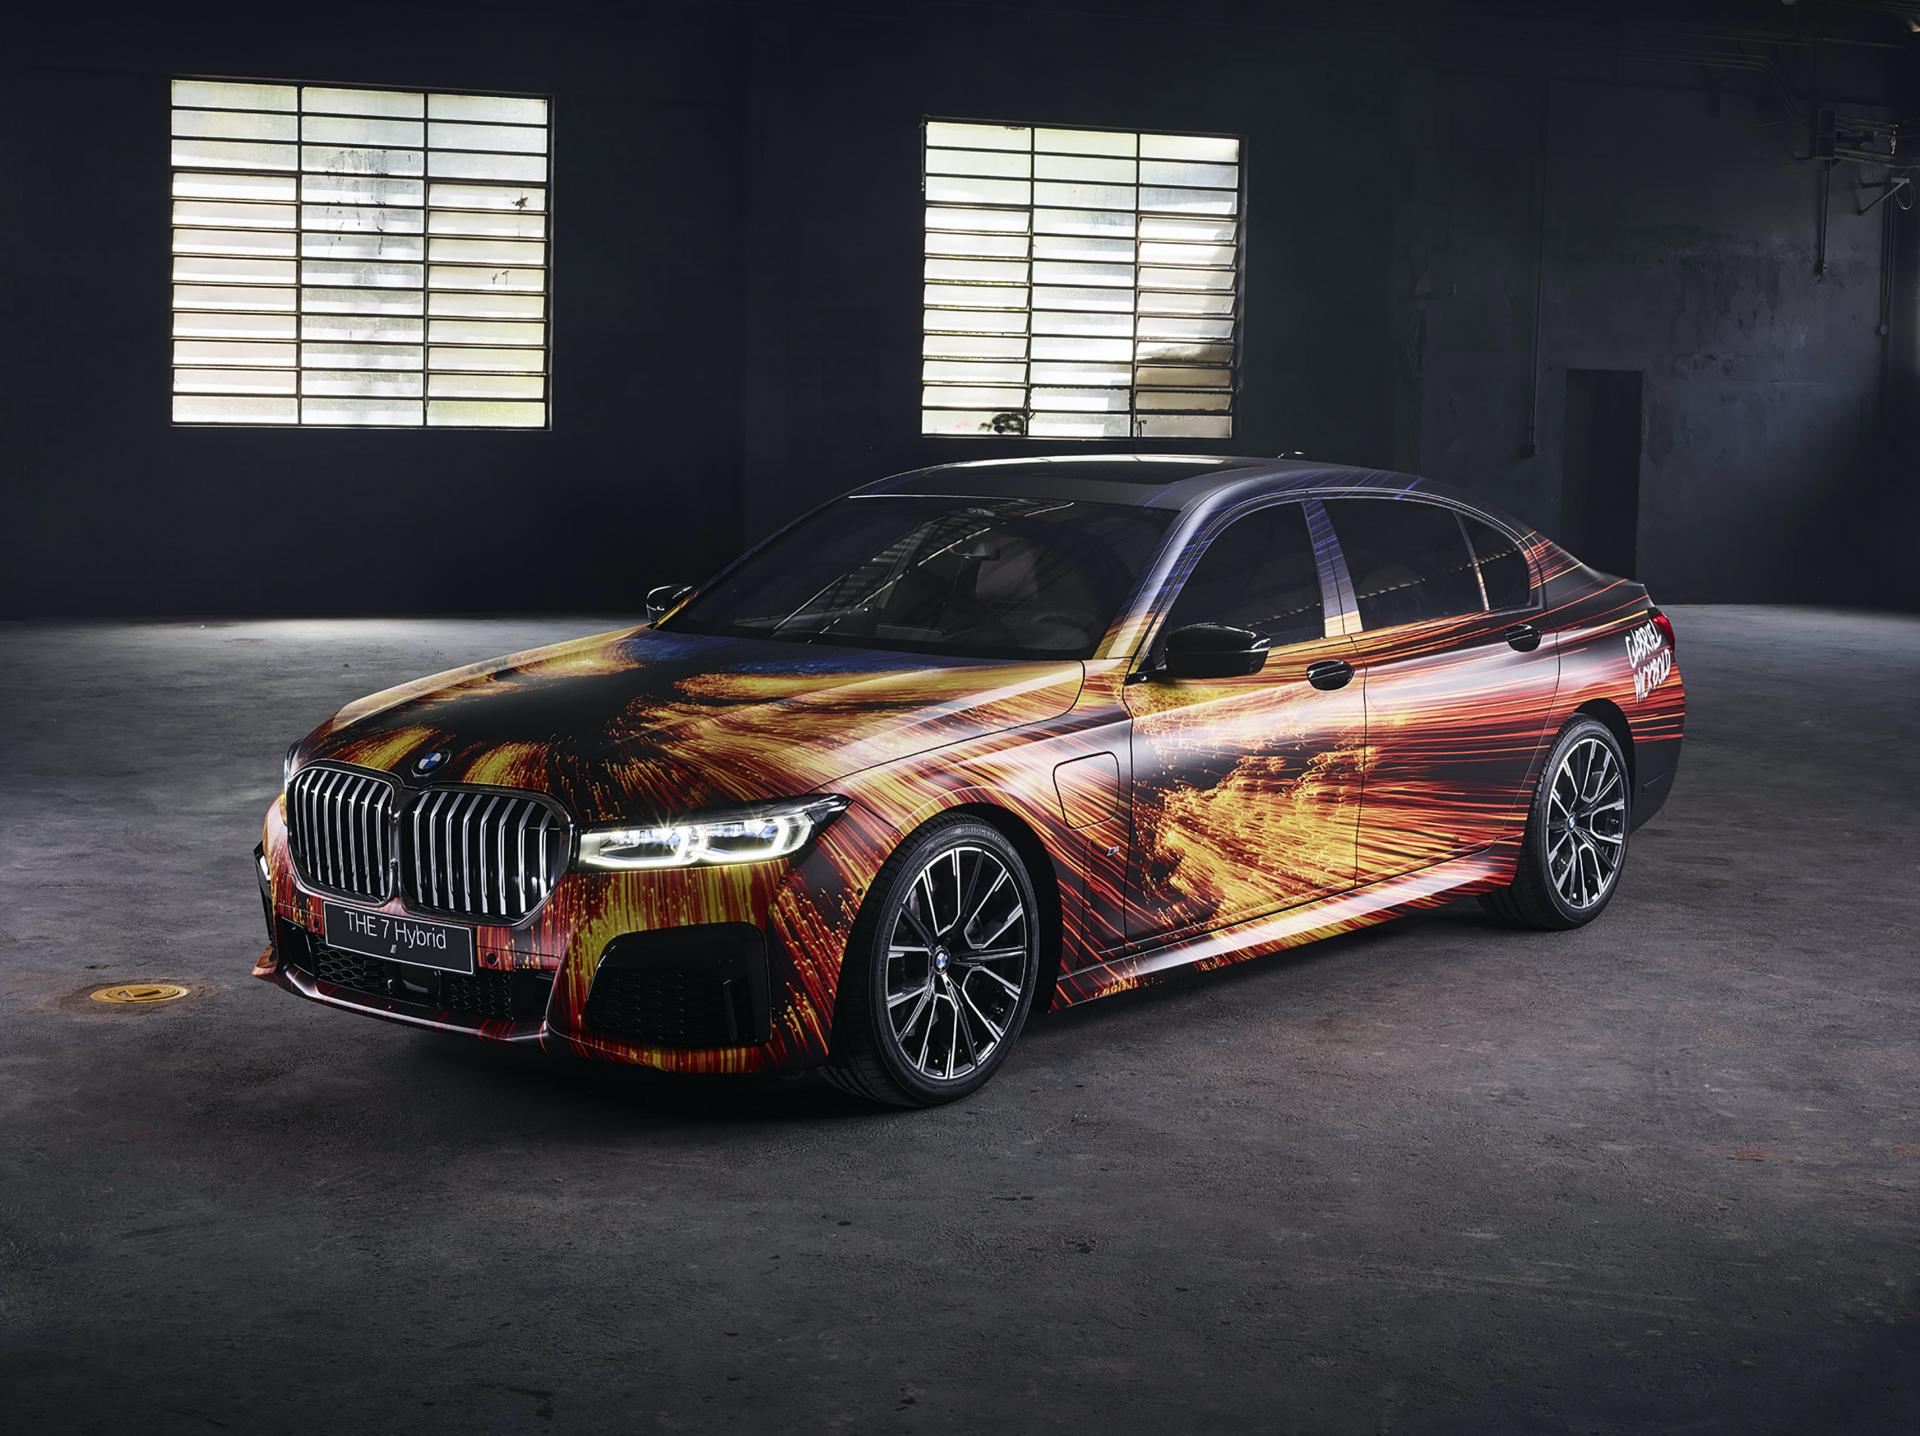 2020 BMW 745Le M Sport Gets The 'Art Car' Treatment, Doesn't Look Any